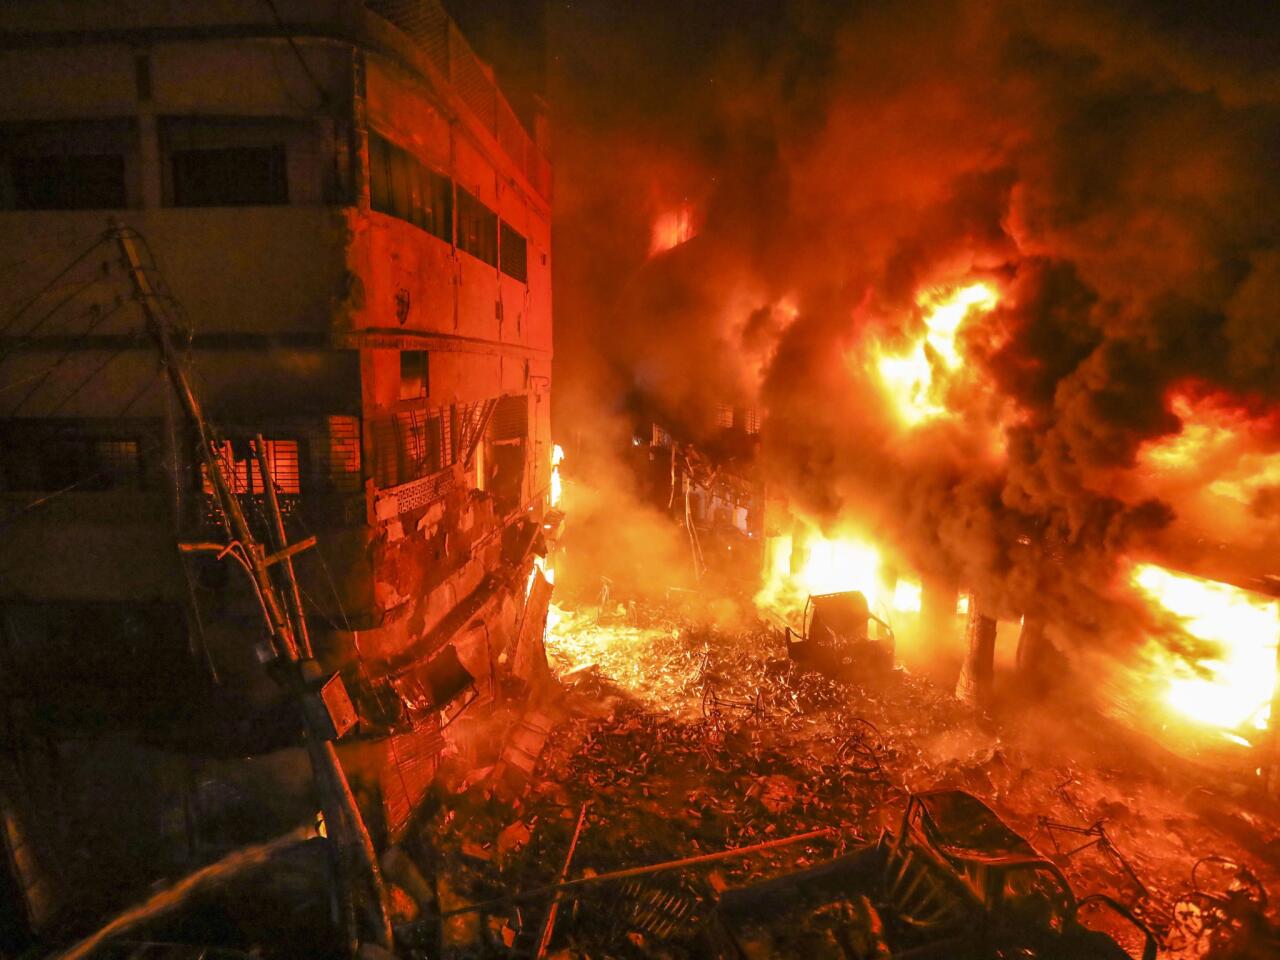 Flames rise from a fire in a densely packed district of Dhaka, Bangladesh. The blaze raced through at least five buildings in an old part of the capital, killing scores.